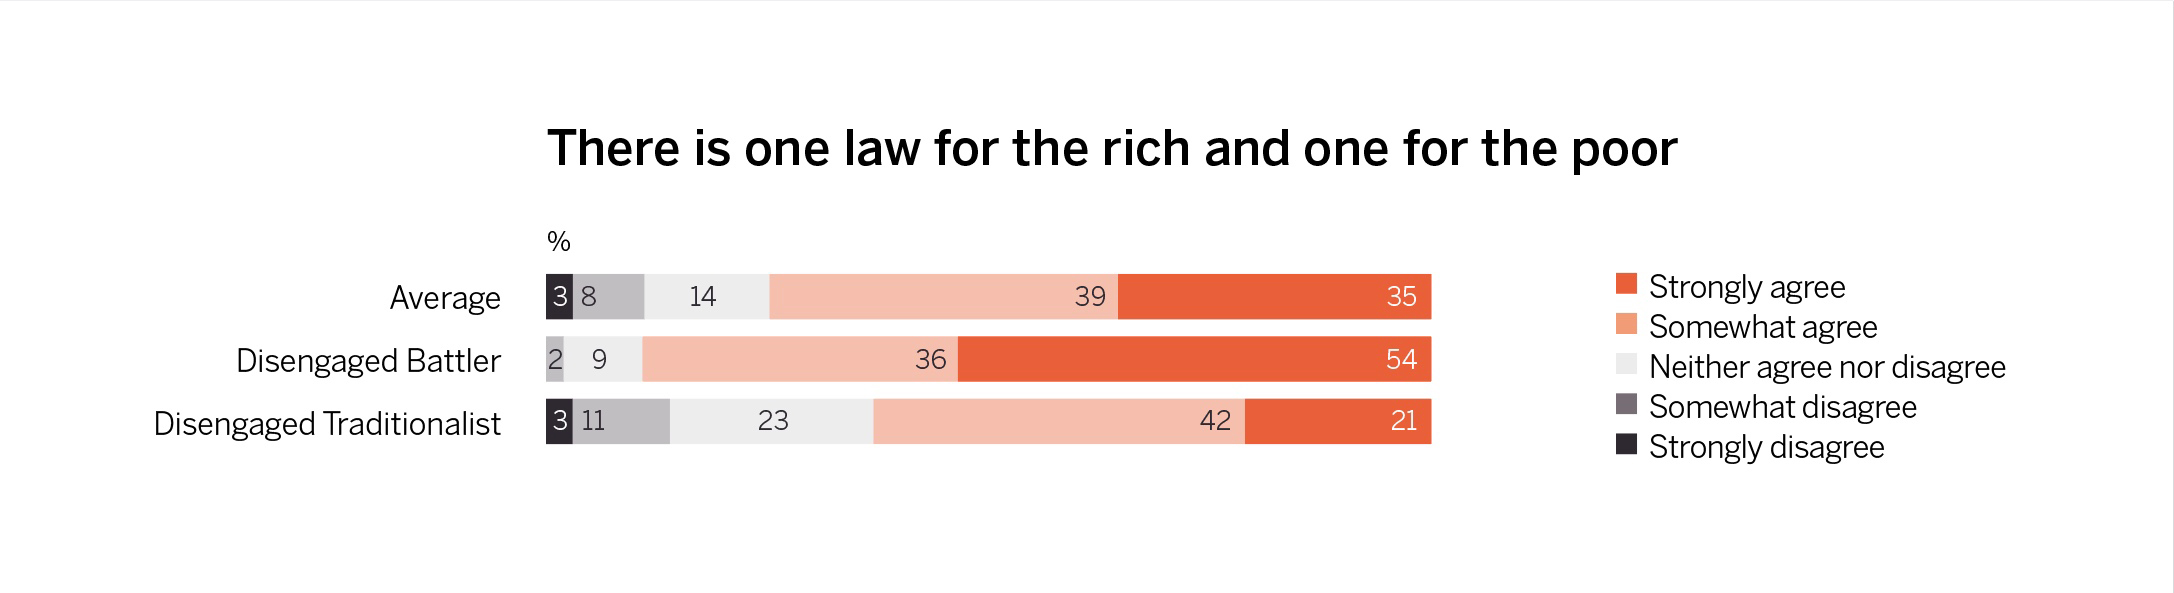 The majority of Disengaged Battlers say there’s one law for the rich and one for the poor